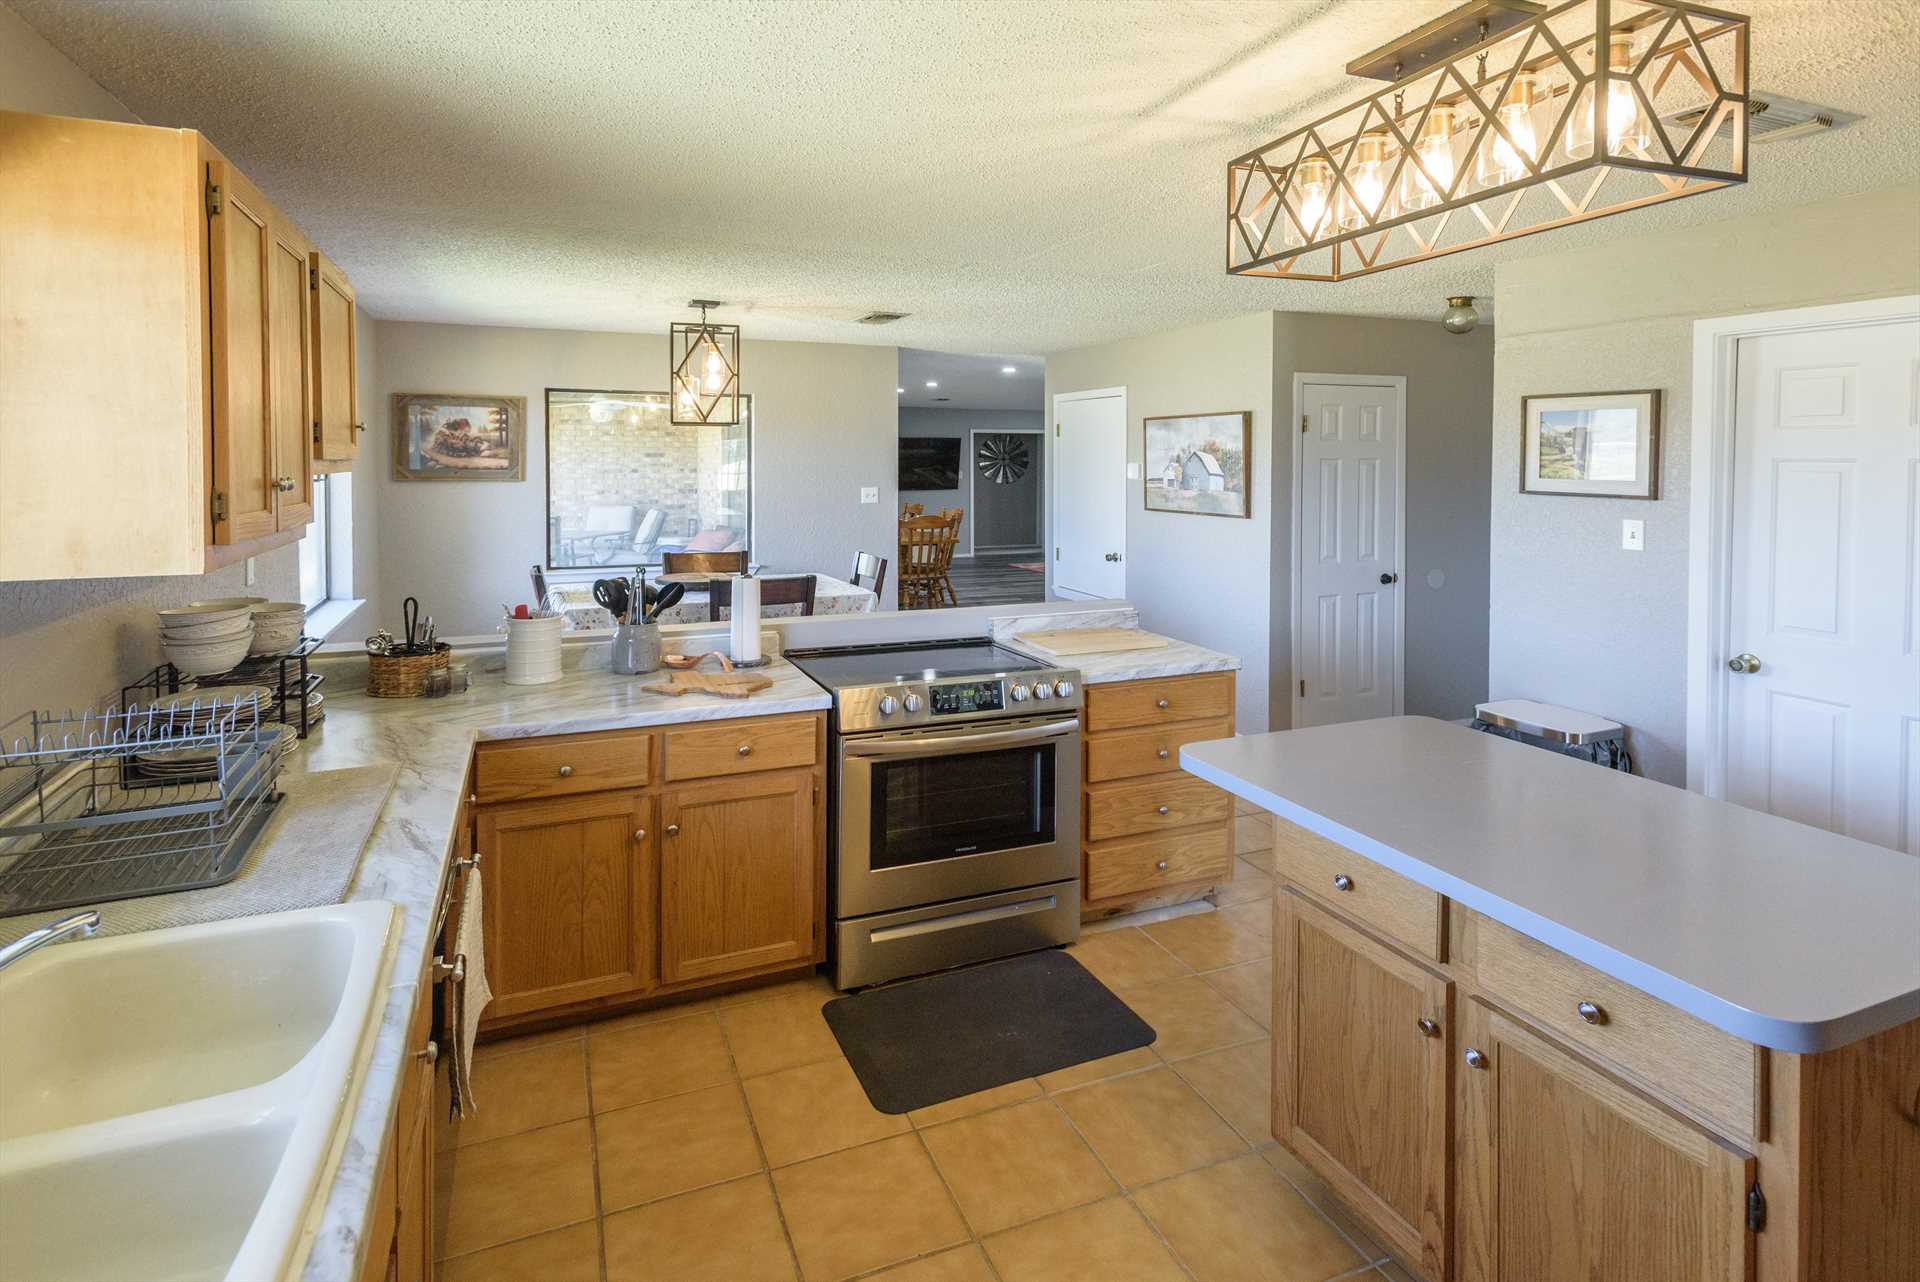                                                 Our guests love that there's plenty of elbow room in the kitchen, so even multiple cooks can create with ease!